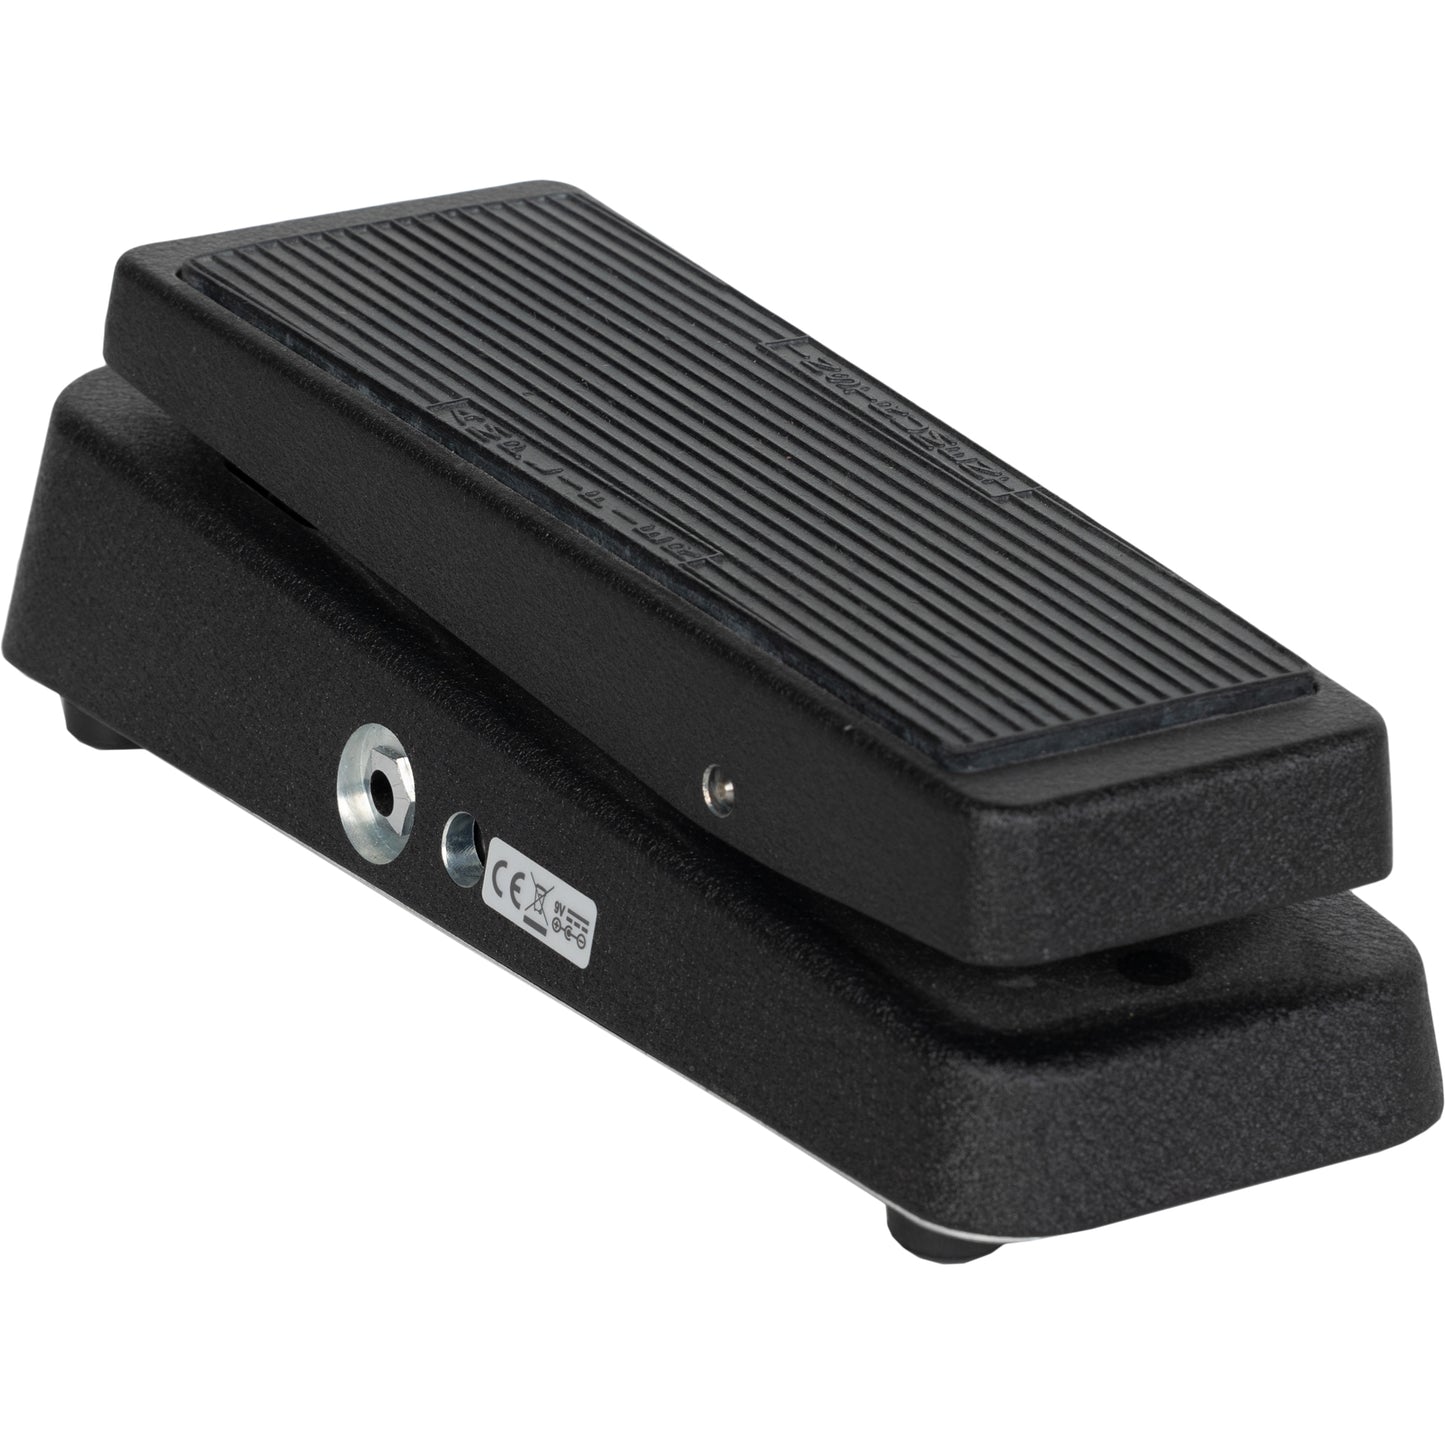 Dunlop Cry Baby Standard Wah Pedal